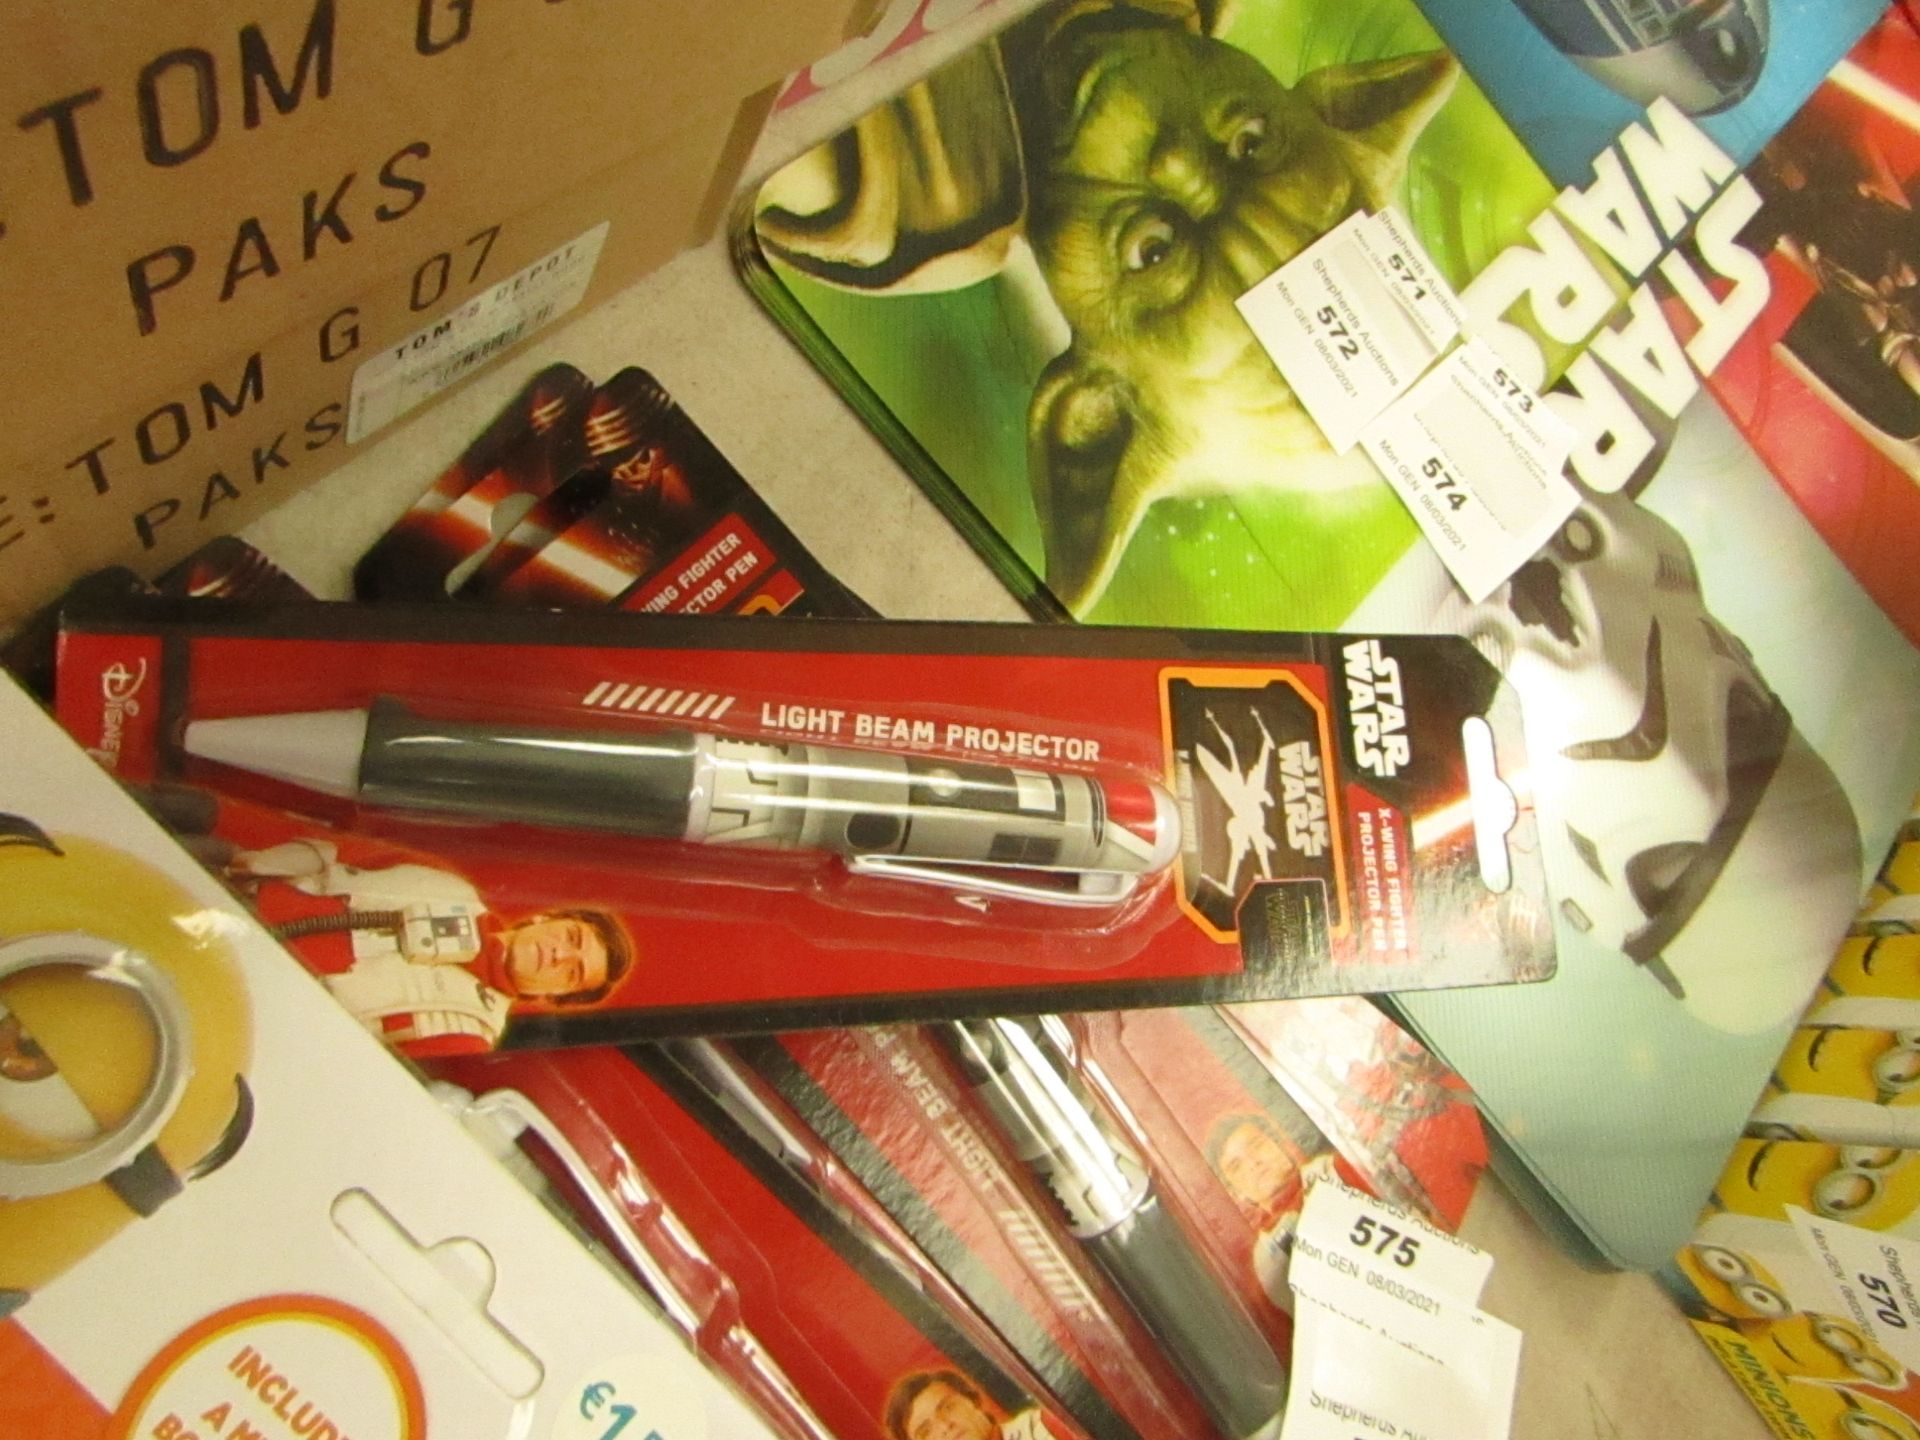 StarWars - X-Wing Fighter Projector Pen - New & Packaged.